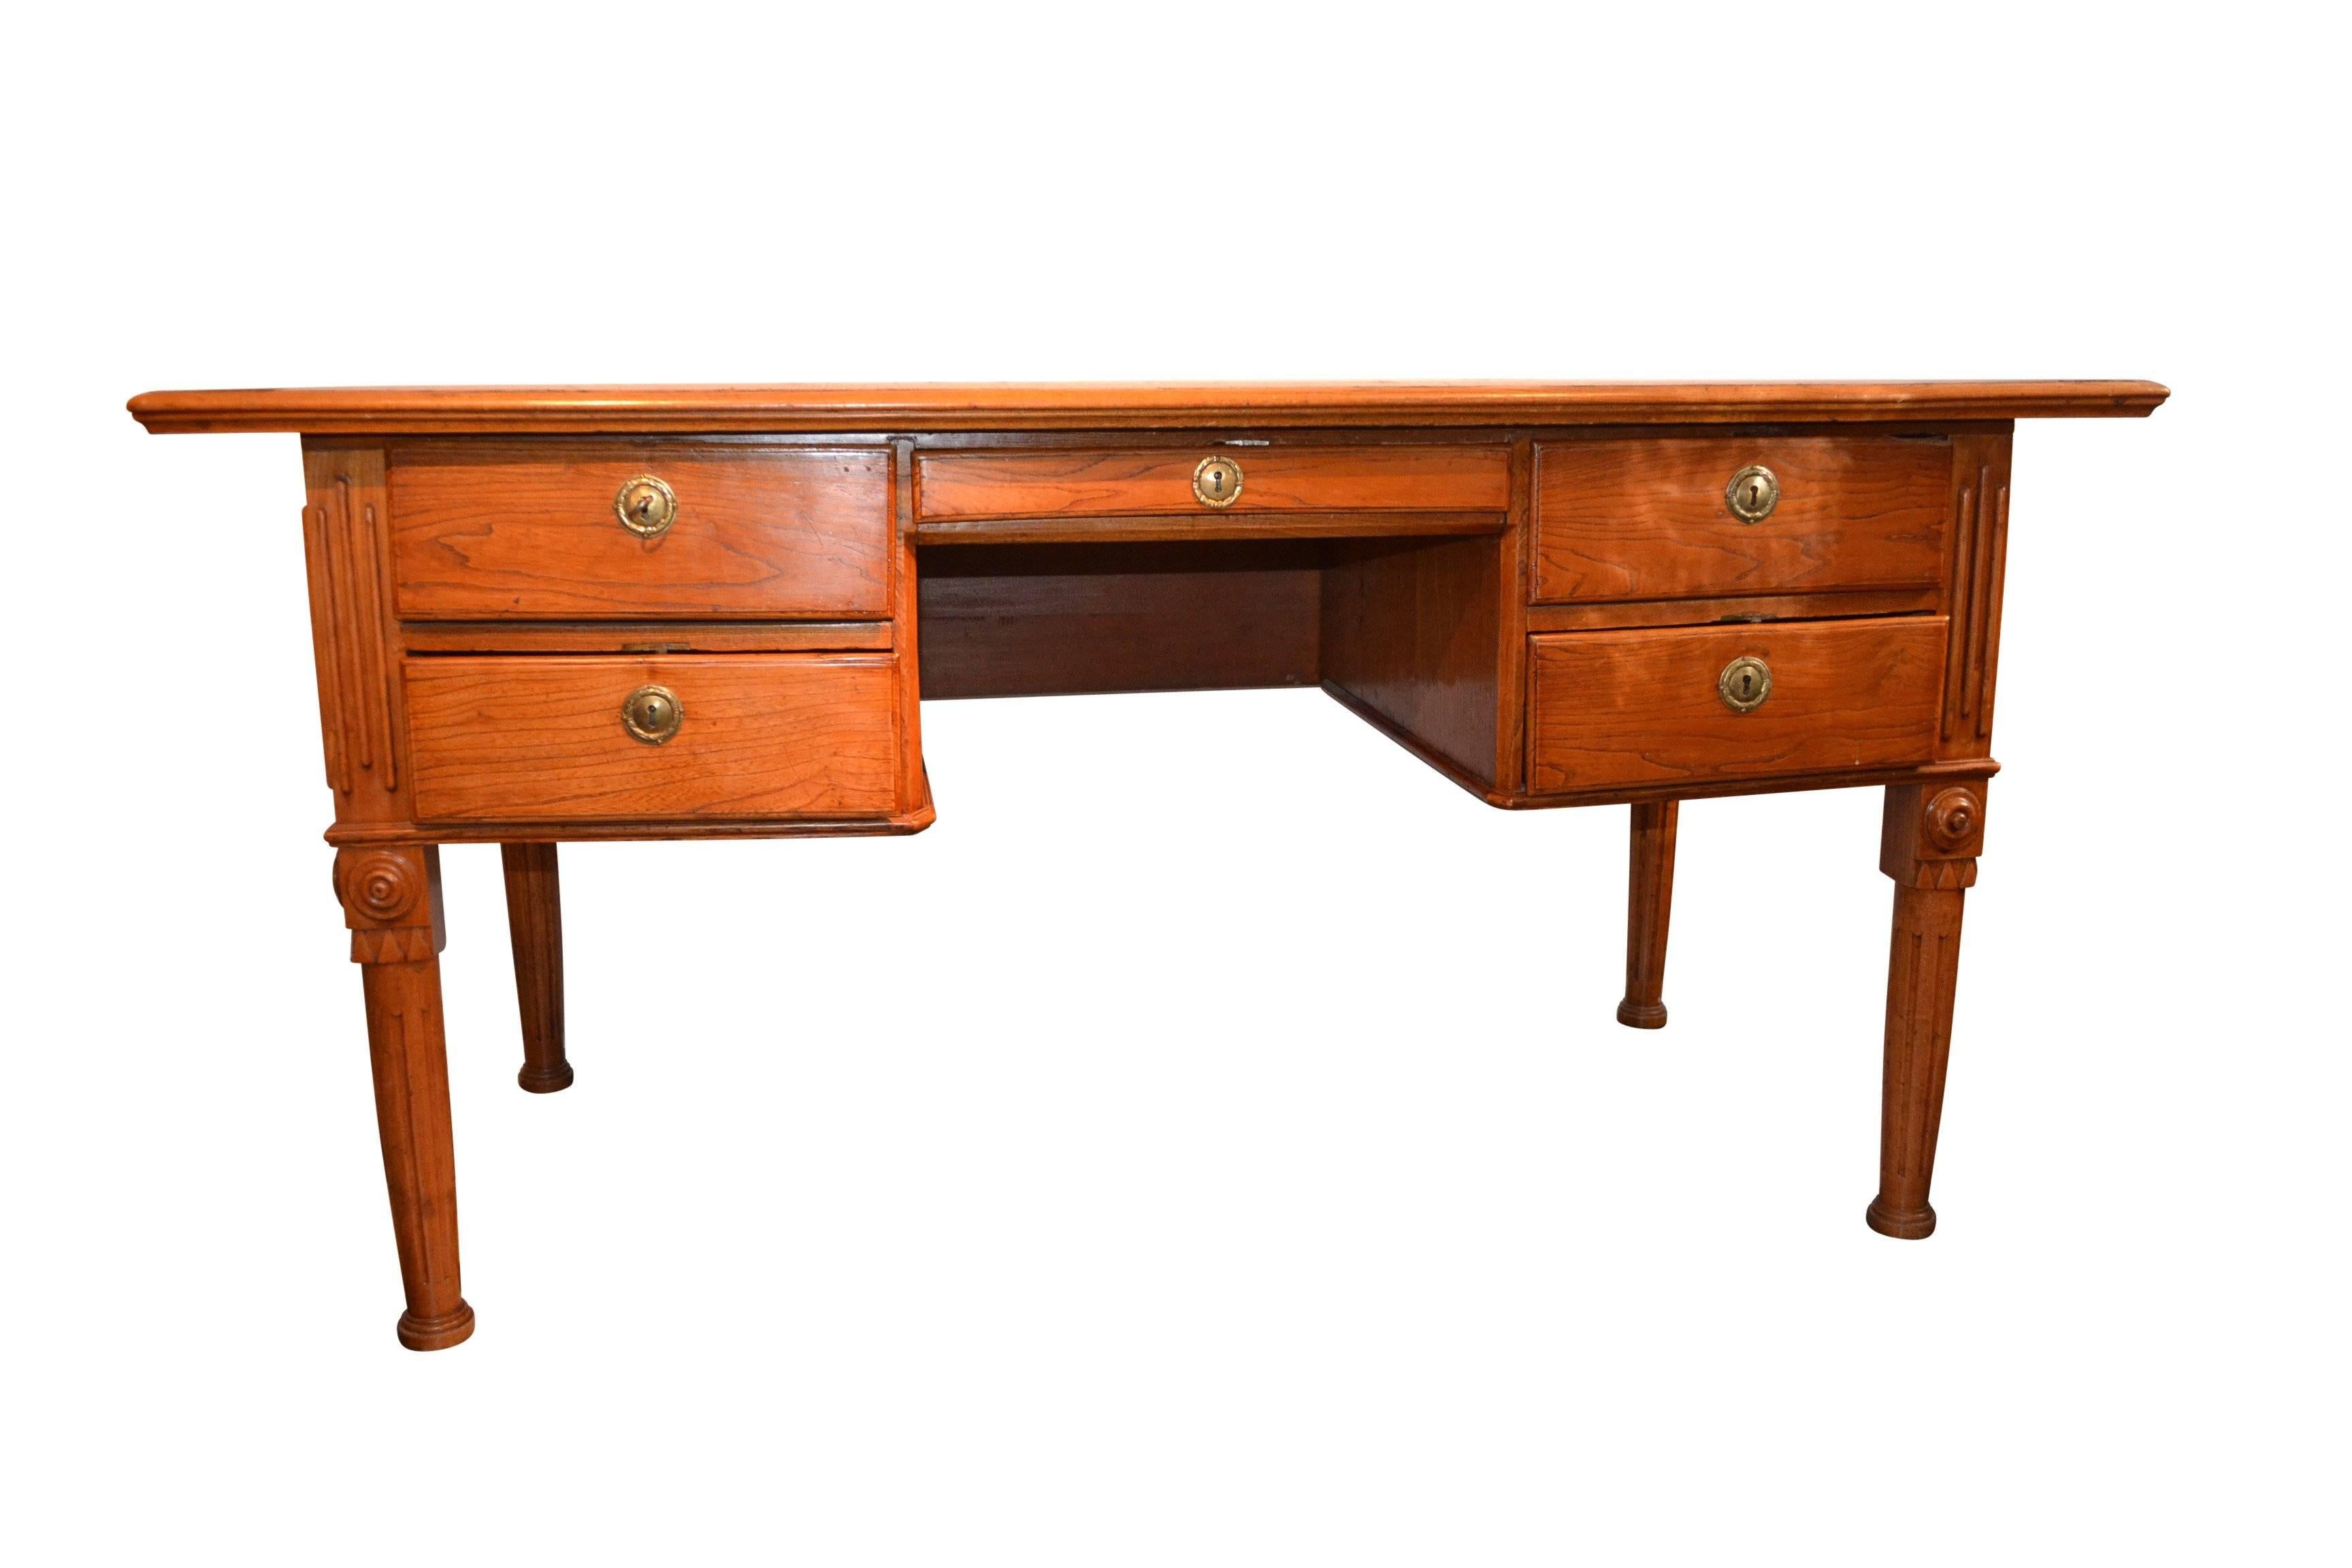 Neoclassical Danish 18th Century Writing Desk By Royal Architect C. F. Harsdorff For Sale